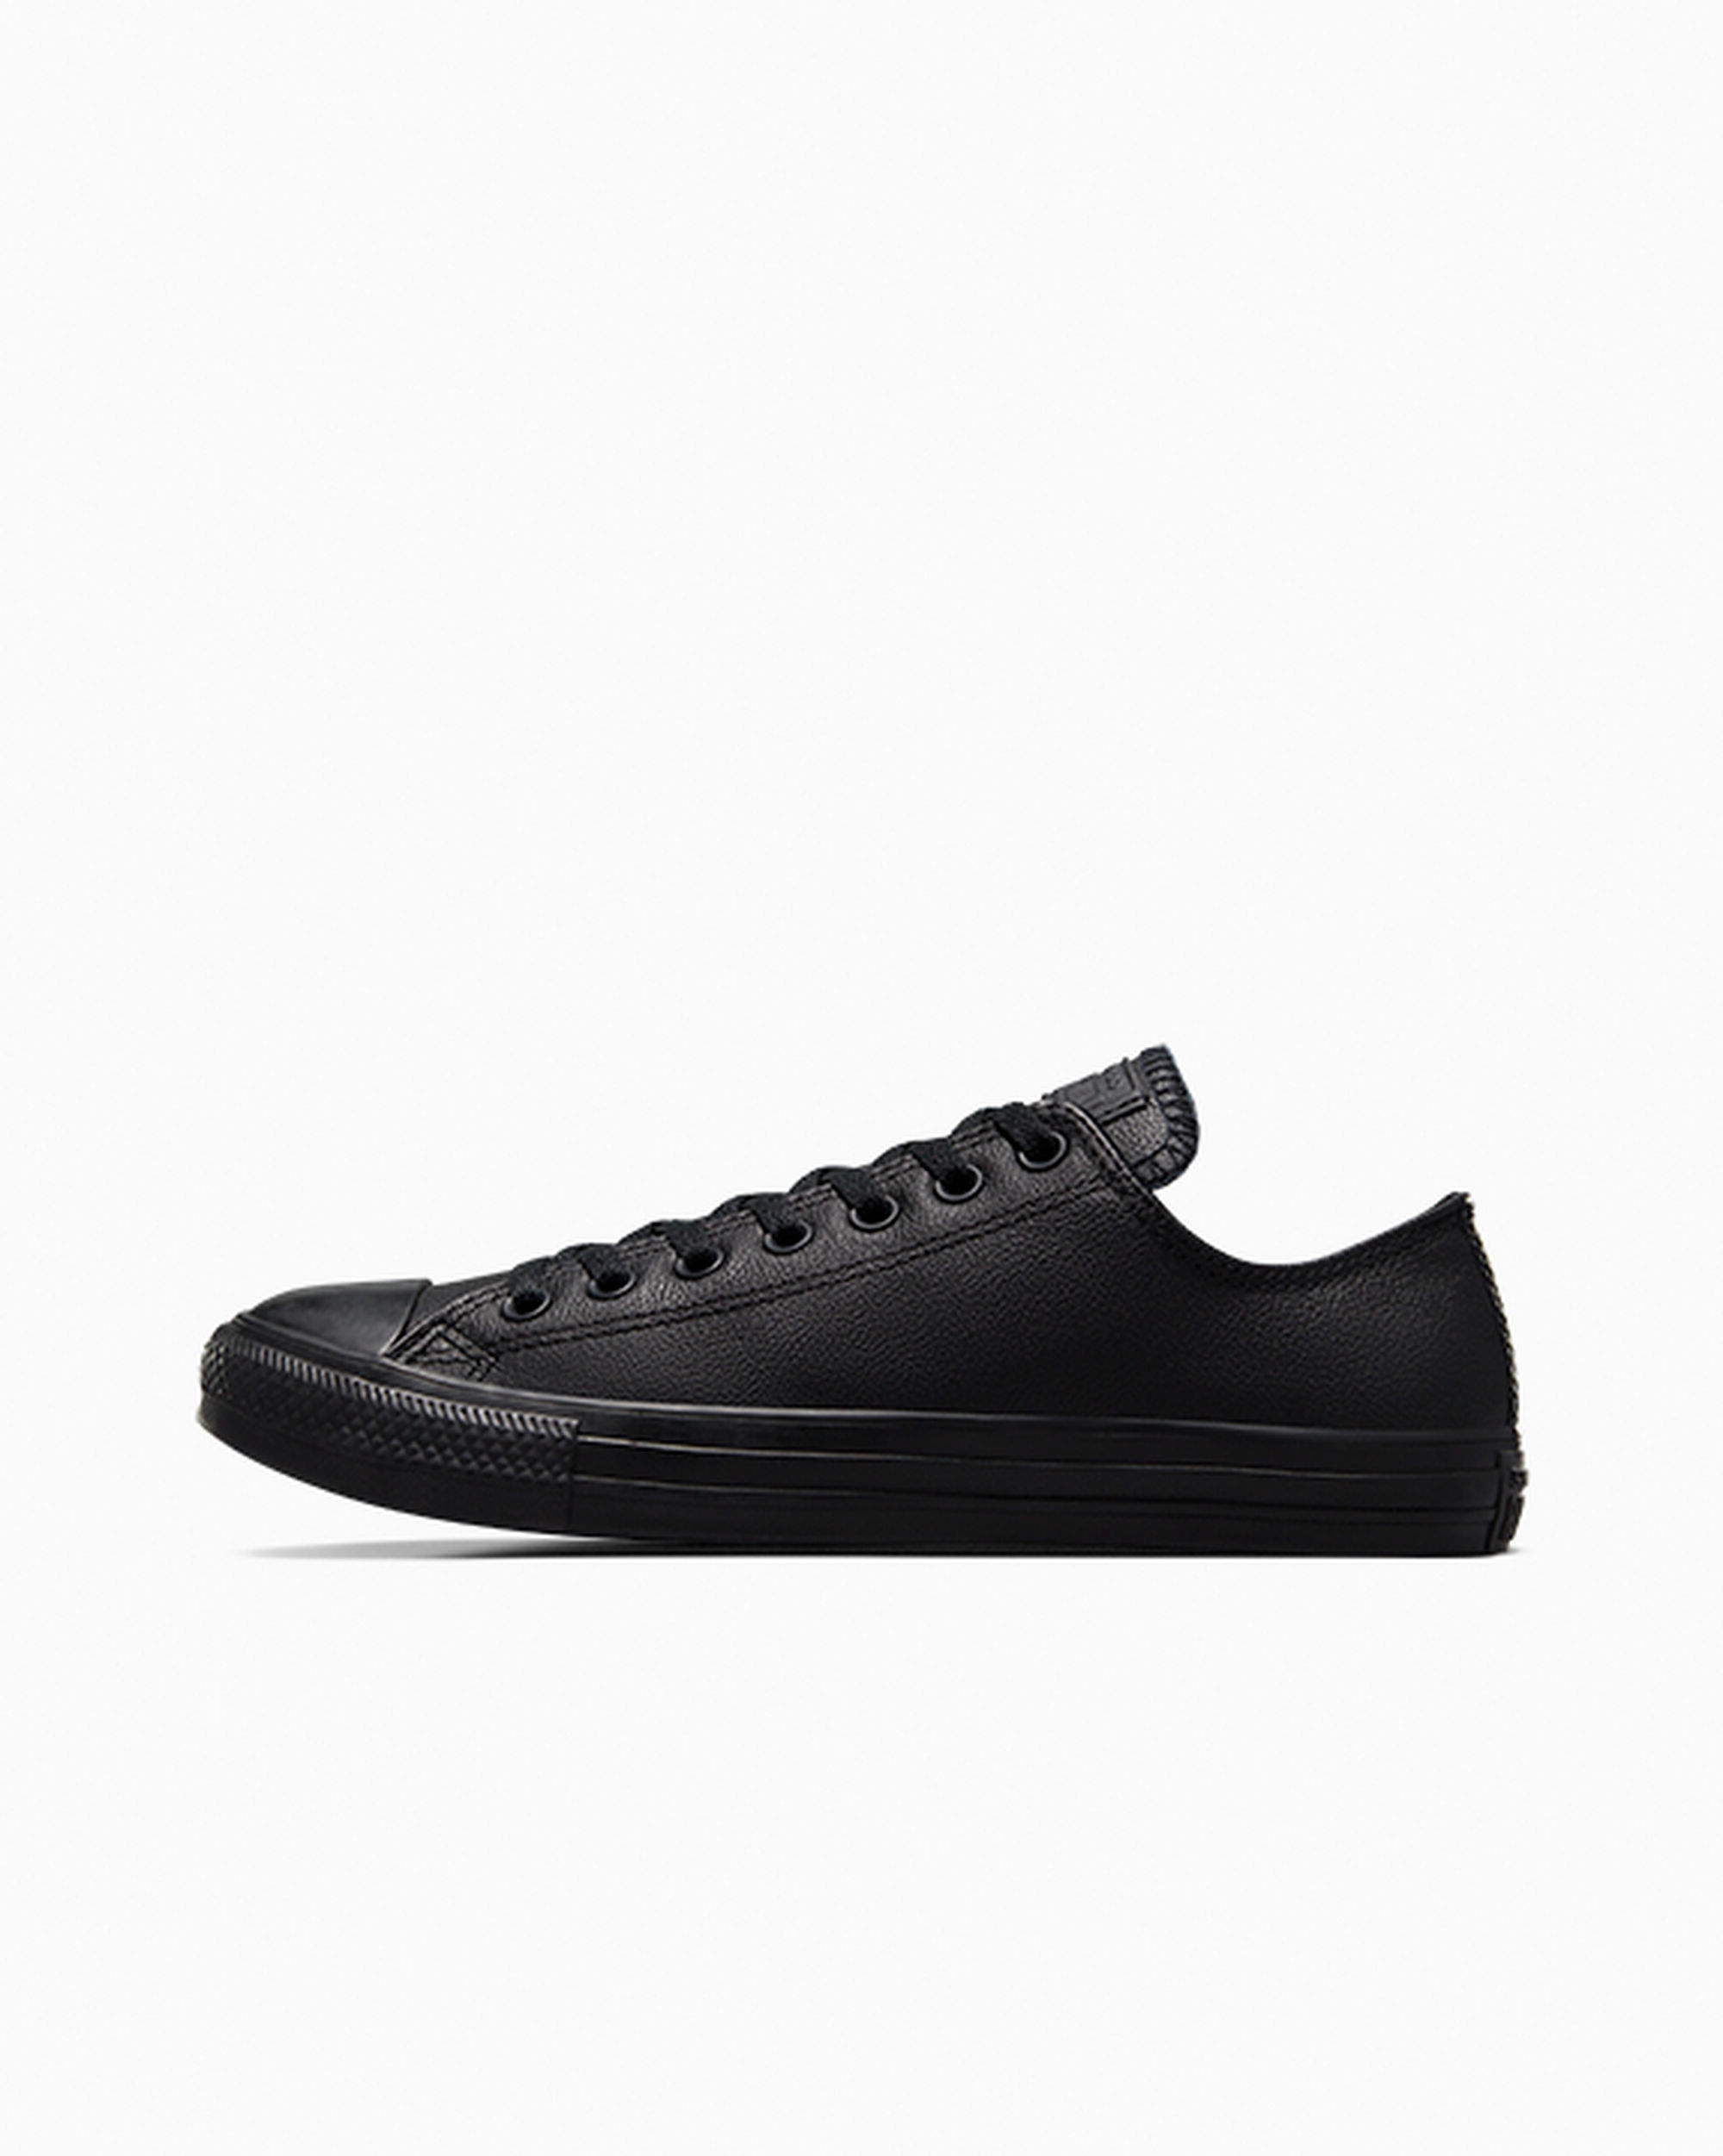 converse-chuck-taylor-all-star-leather-shoes-135253c